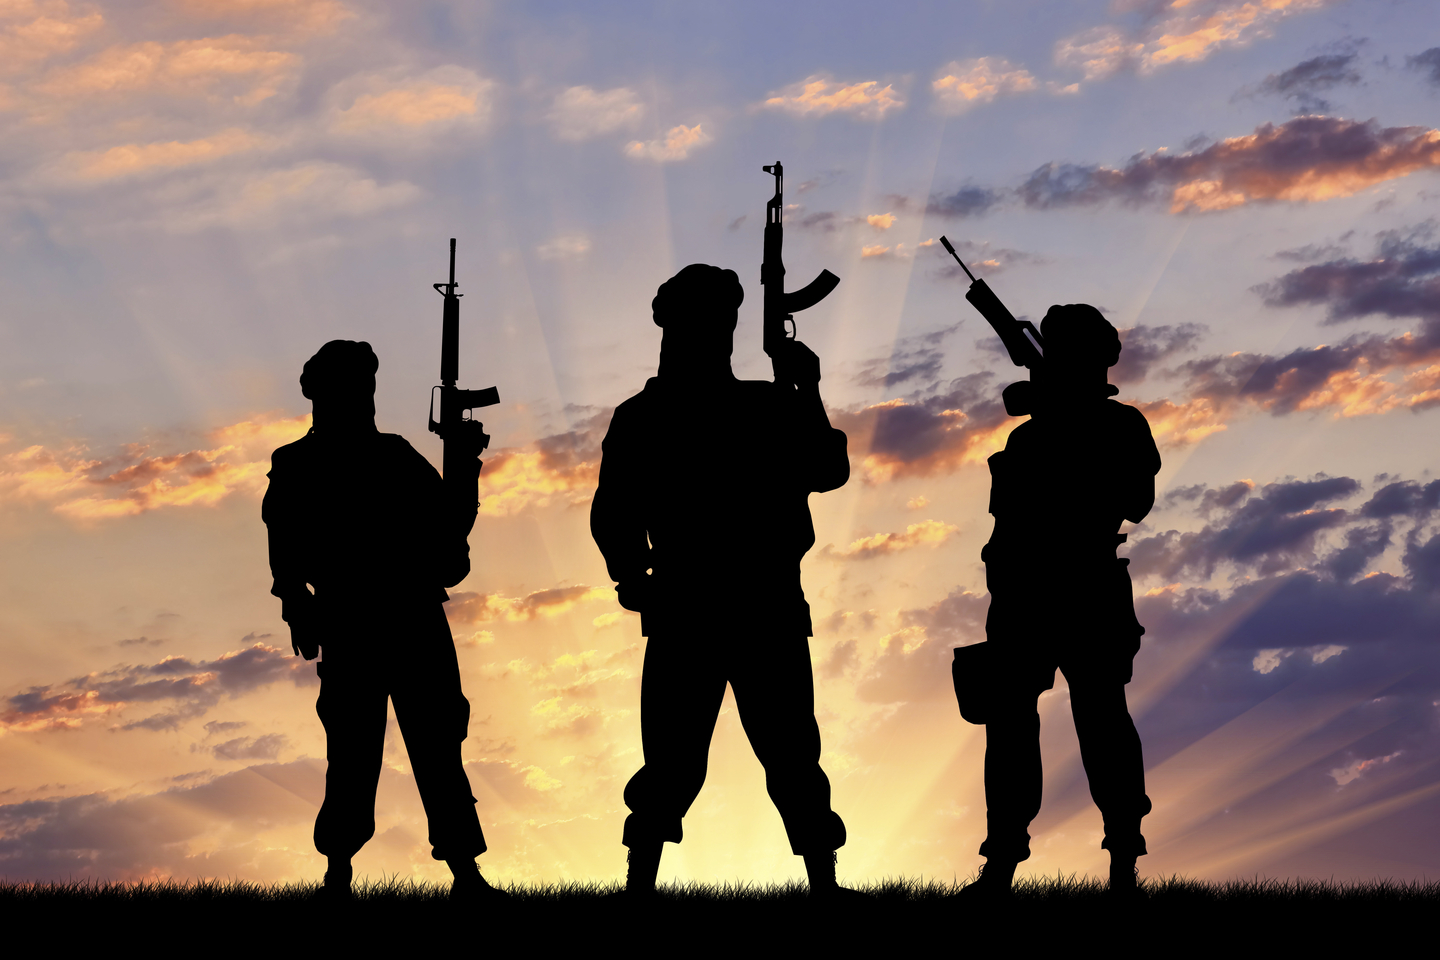 Concept of a terrorist. Silhouette terrorists with rifle at sunset